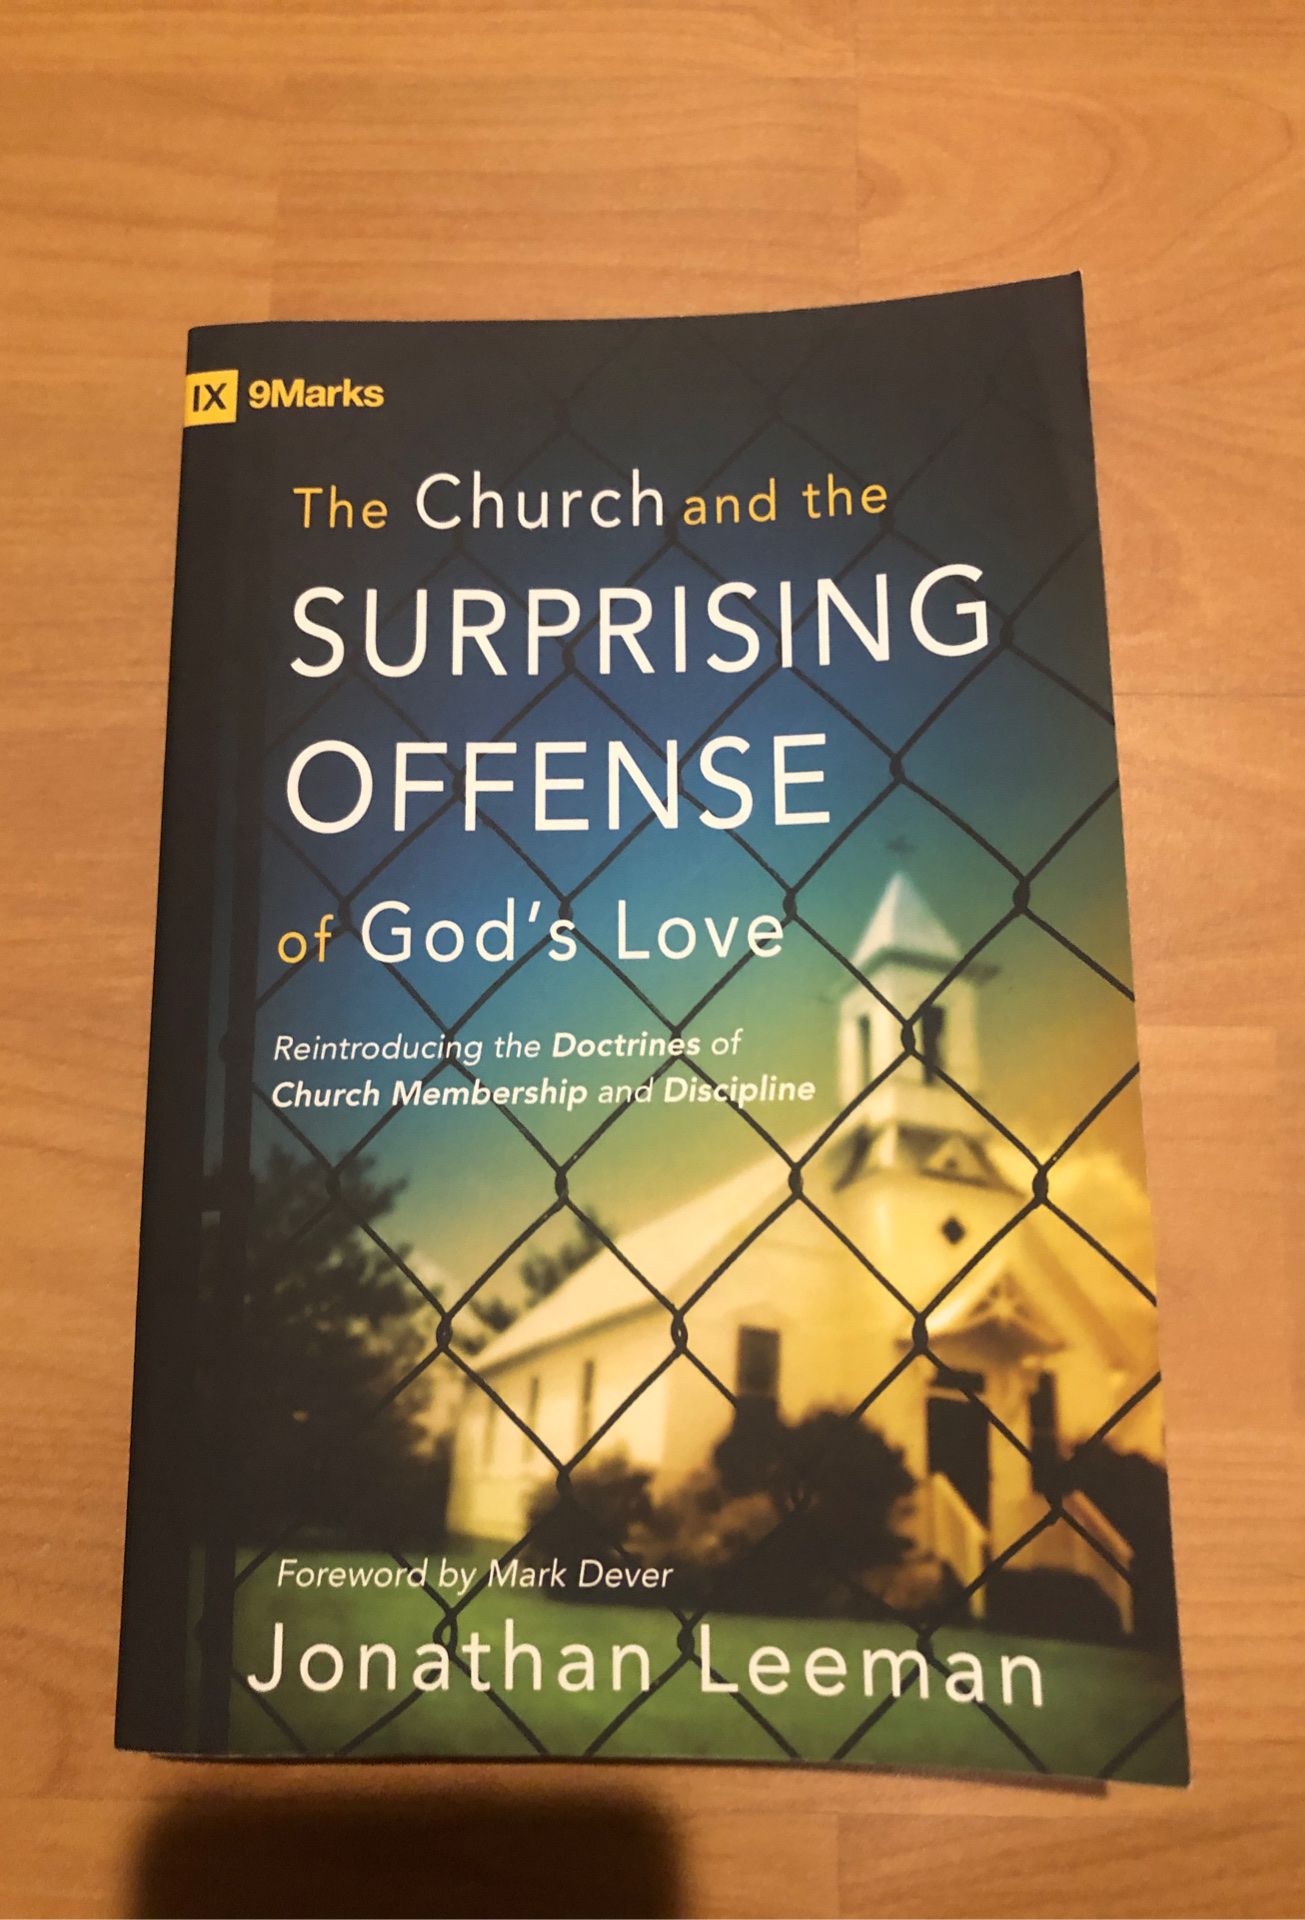 The Church and the Surprising Offense of Gods Love by Jonathan Leeman